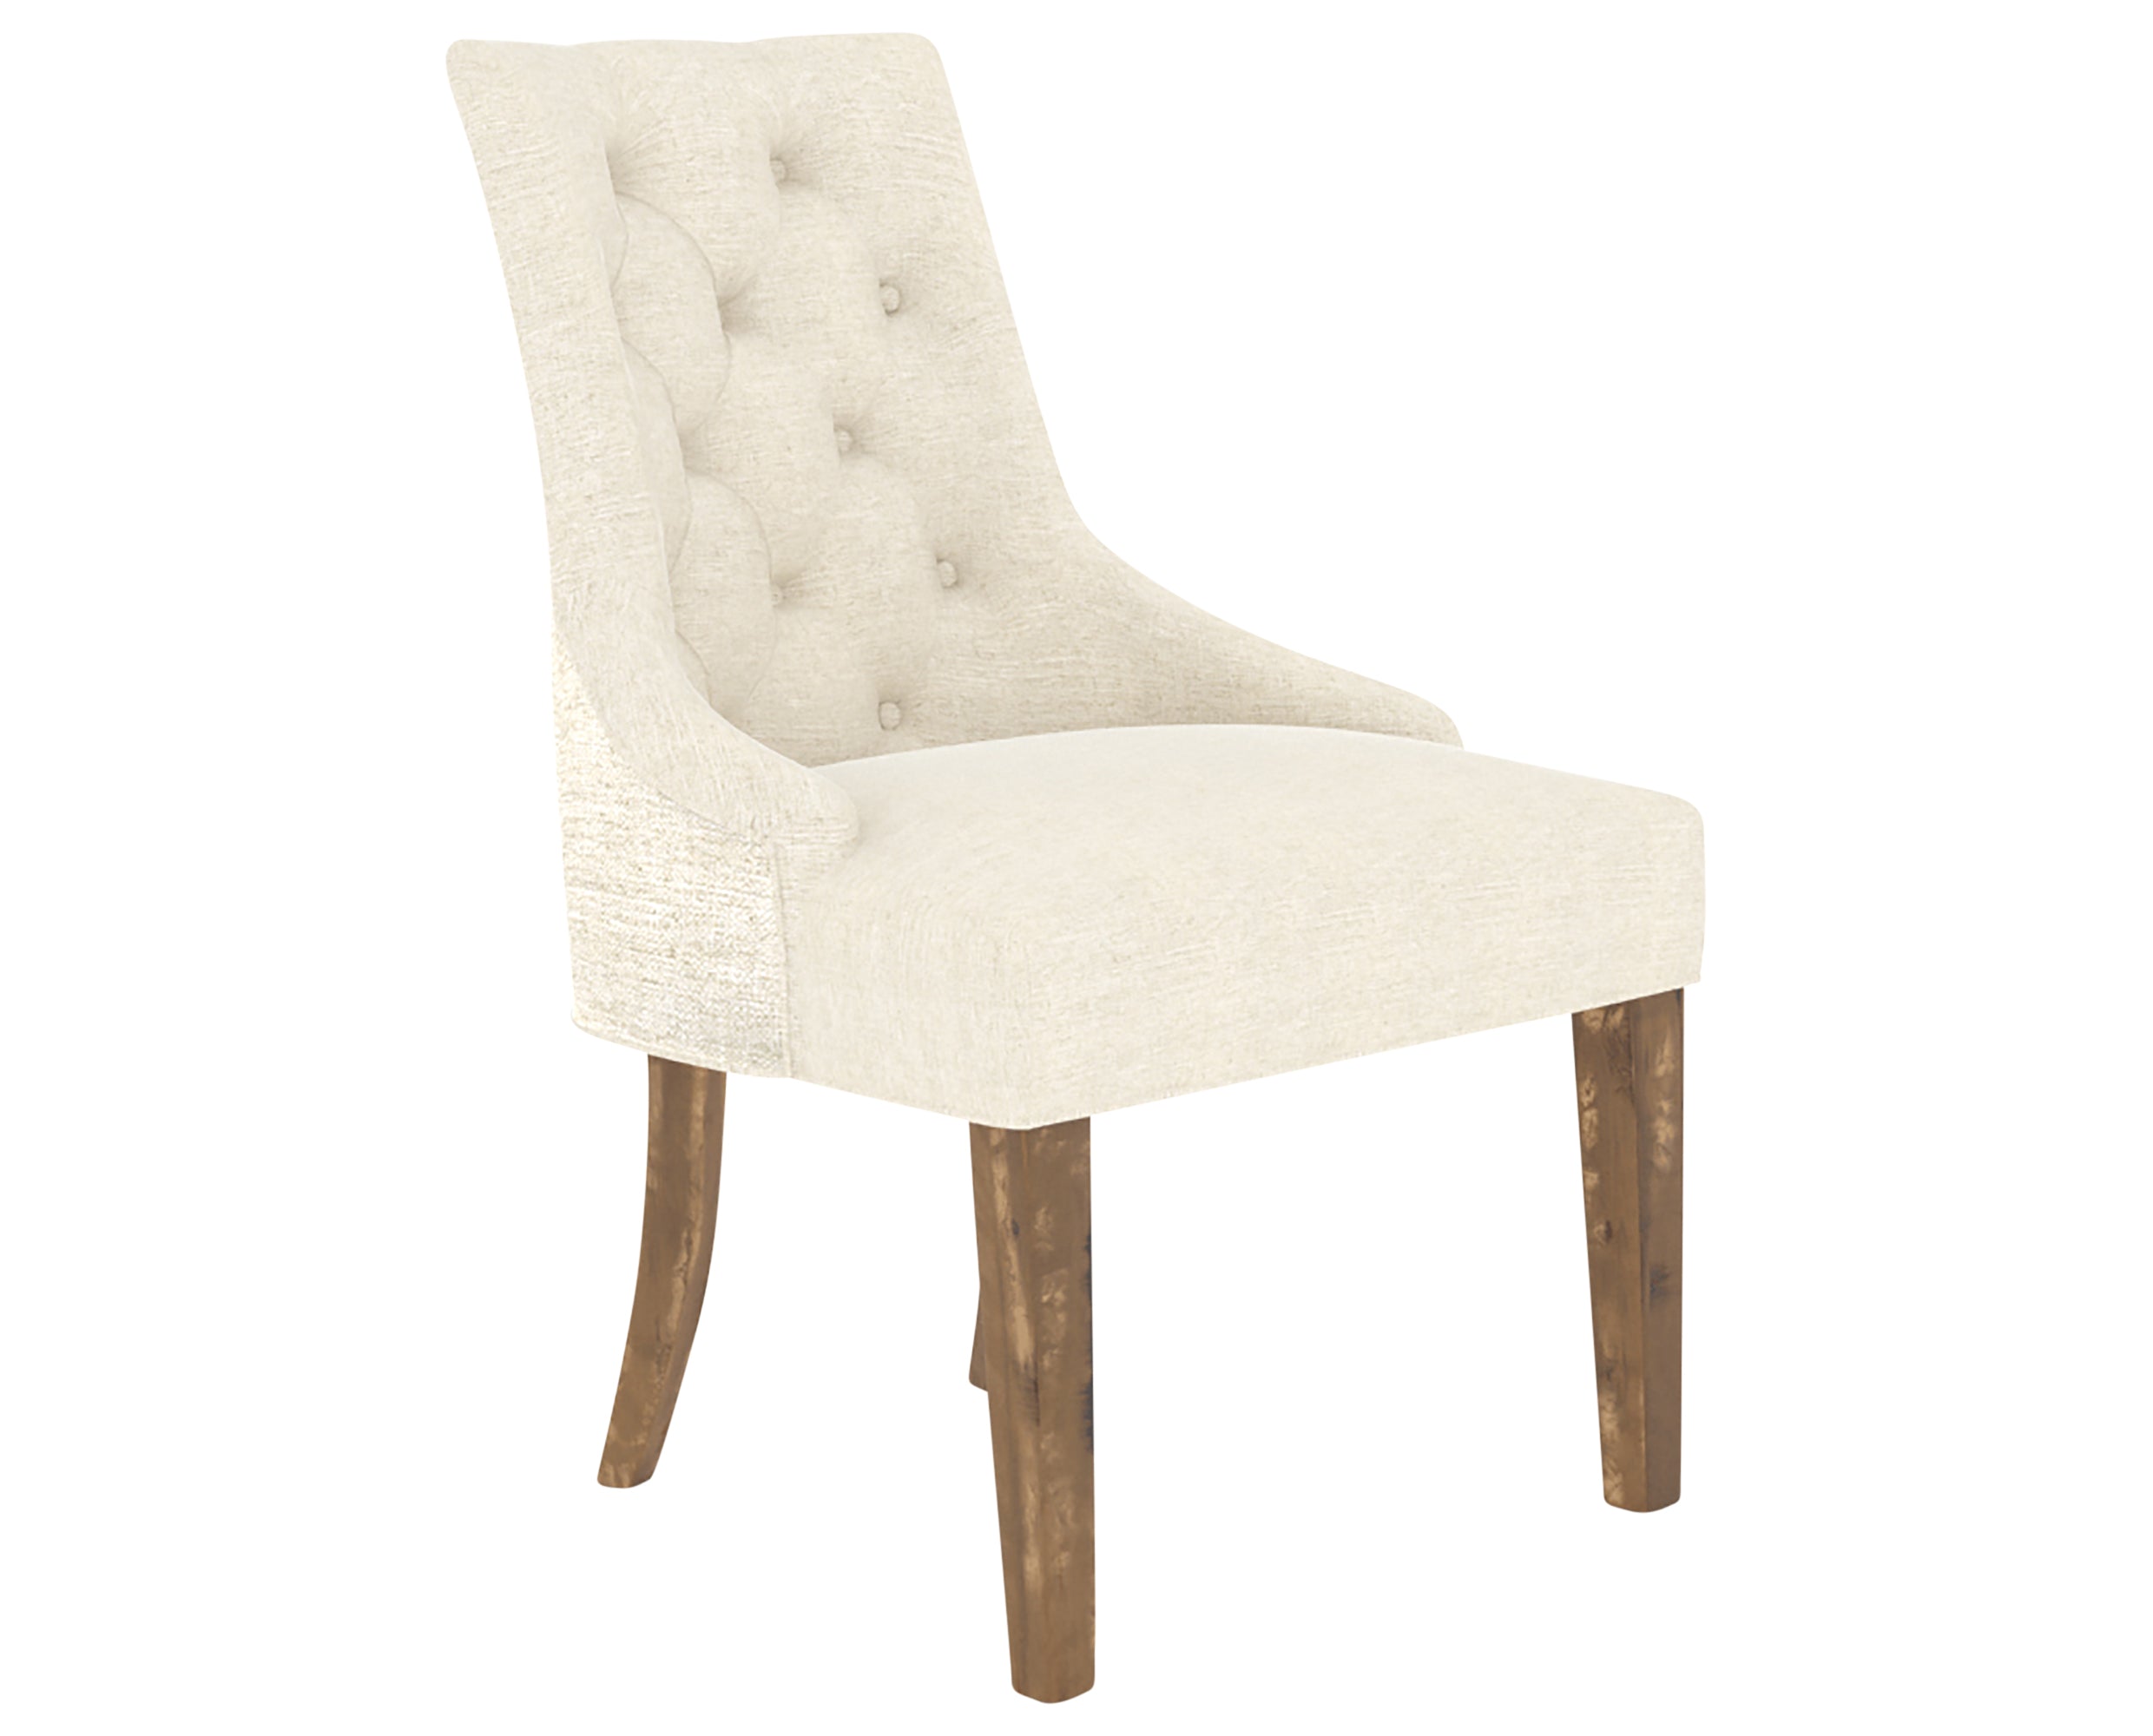 Oak Washed and Fabric TW | Canadel Champlain Dining Chair 318 | Valley Ridge Furniture